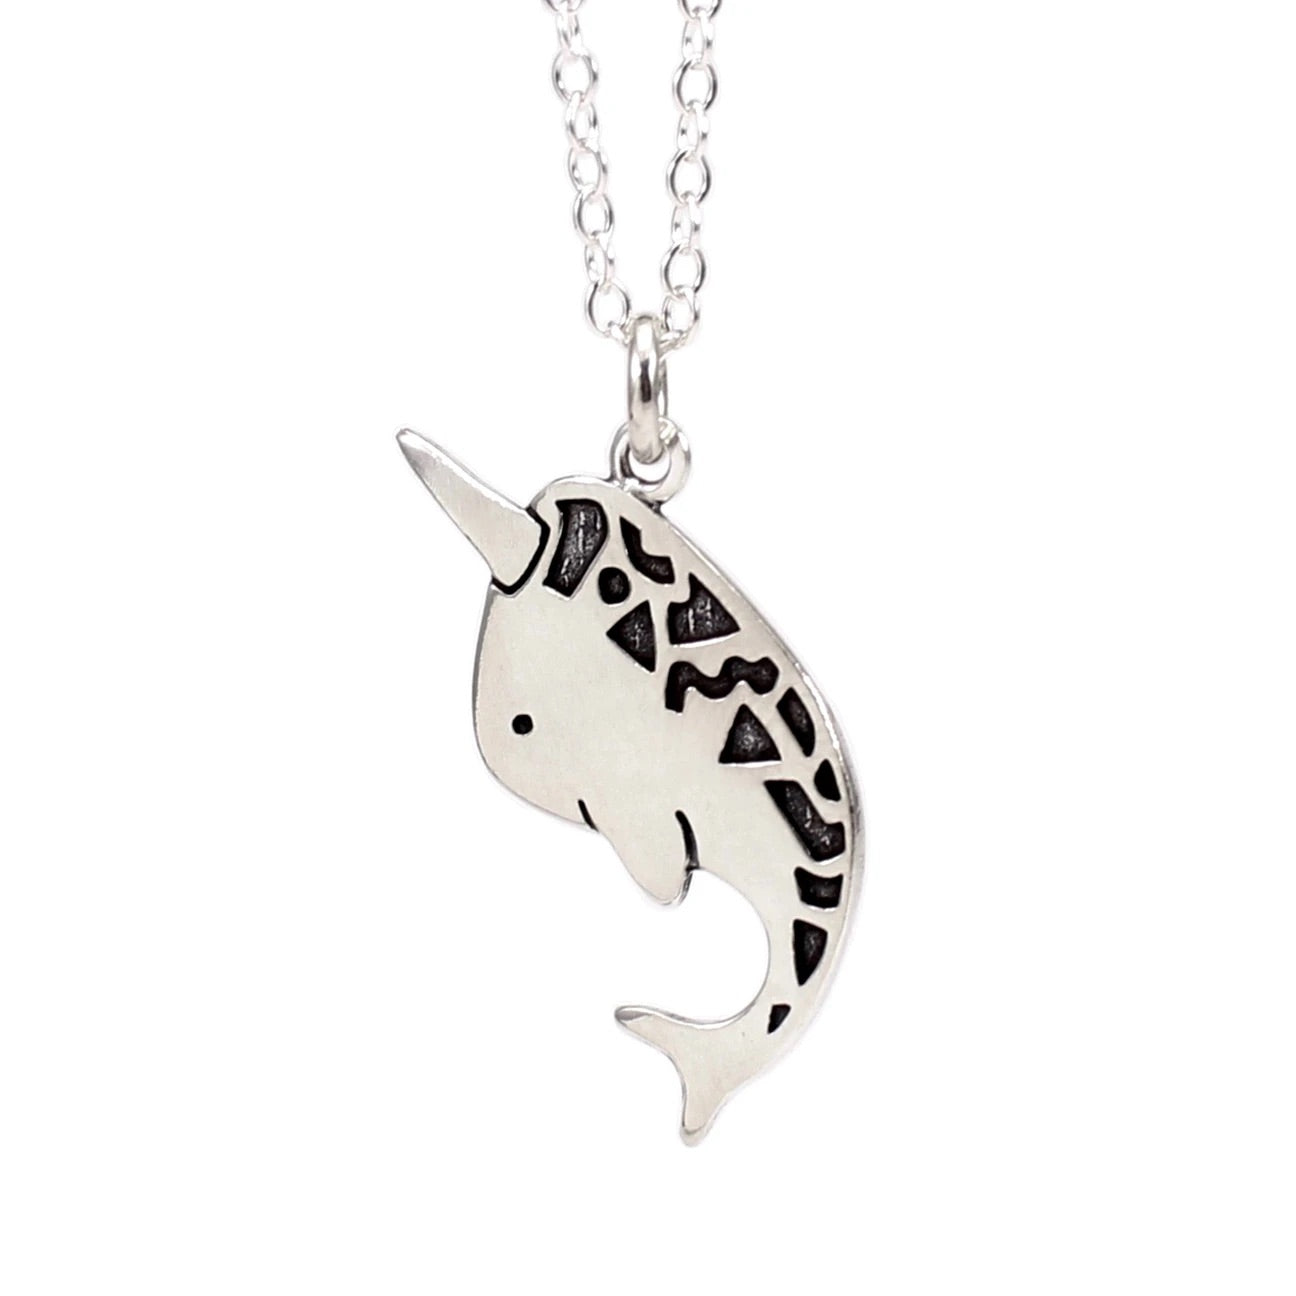 narwhal necklace